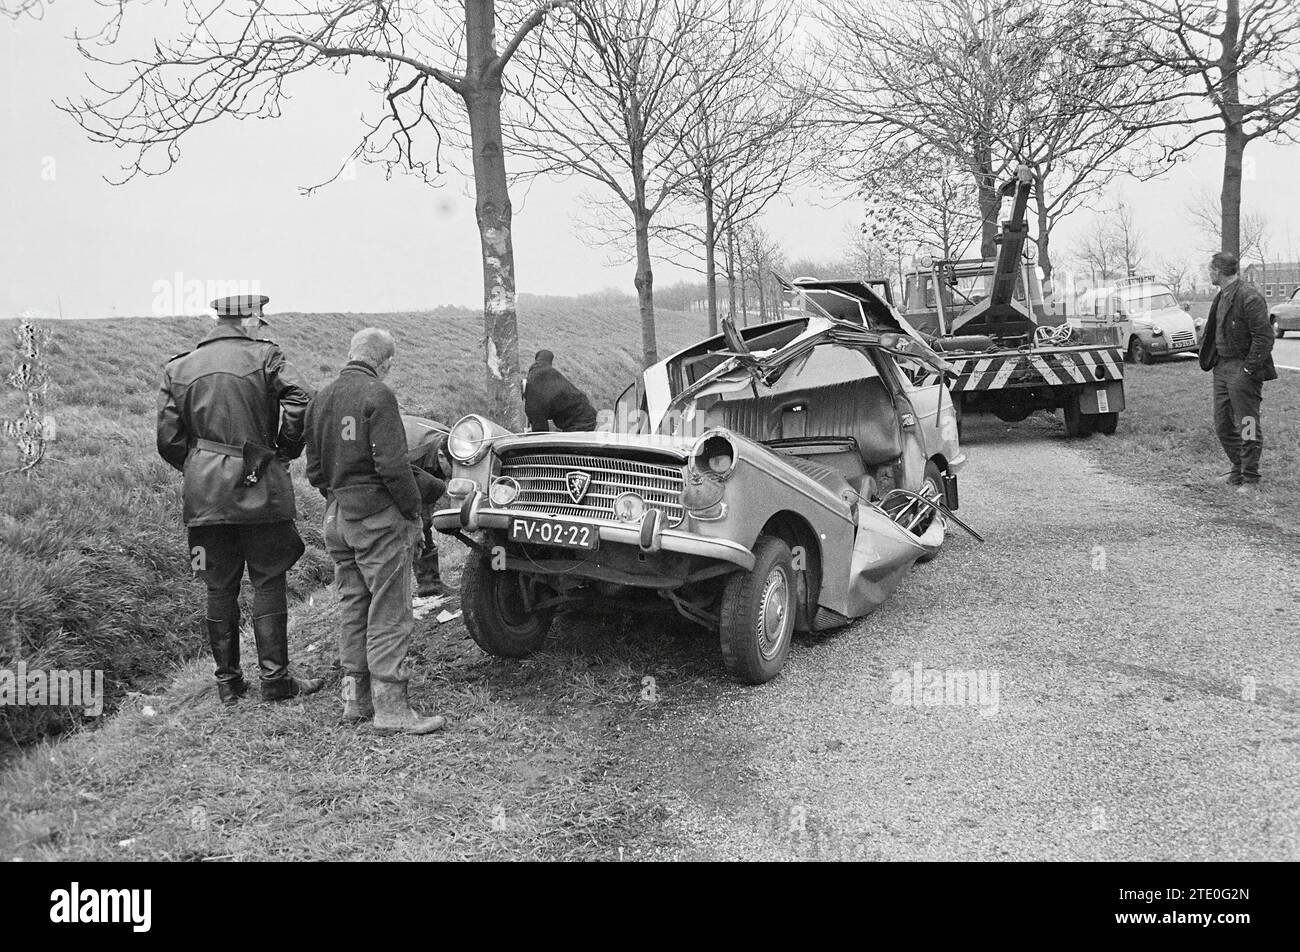 Peugeot car involved in an accident, 00-00-1970, Whizgle News from the Past, Tailored for the Future. Explore historical narratives, Dutch The Netherlands agency image with a modern perspective, bridging the gap between yesterday's events and tomorrow's insights. A timeless journey shaping the stories that shape our future. Stock Photo